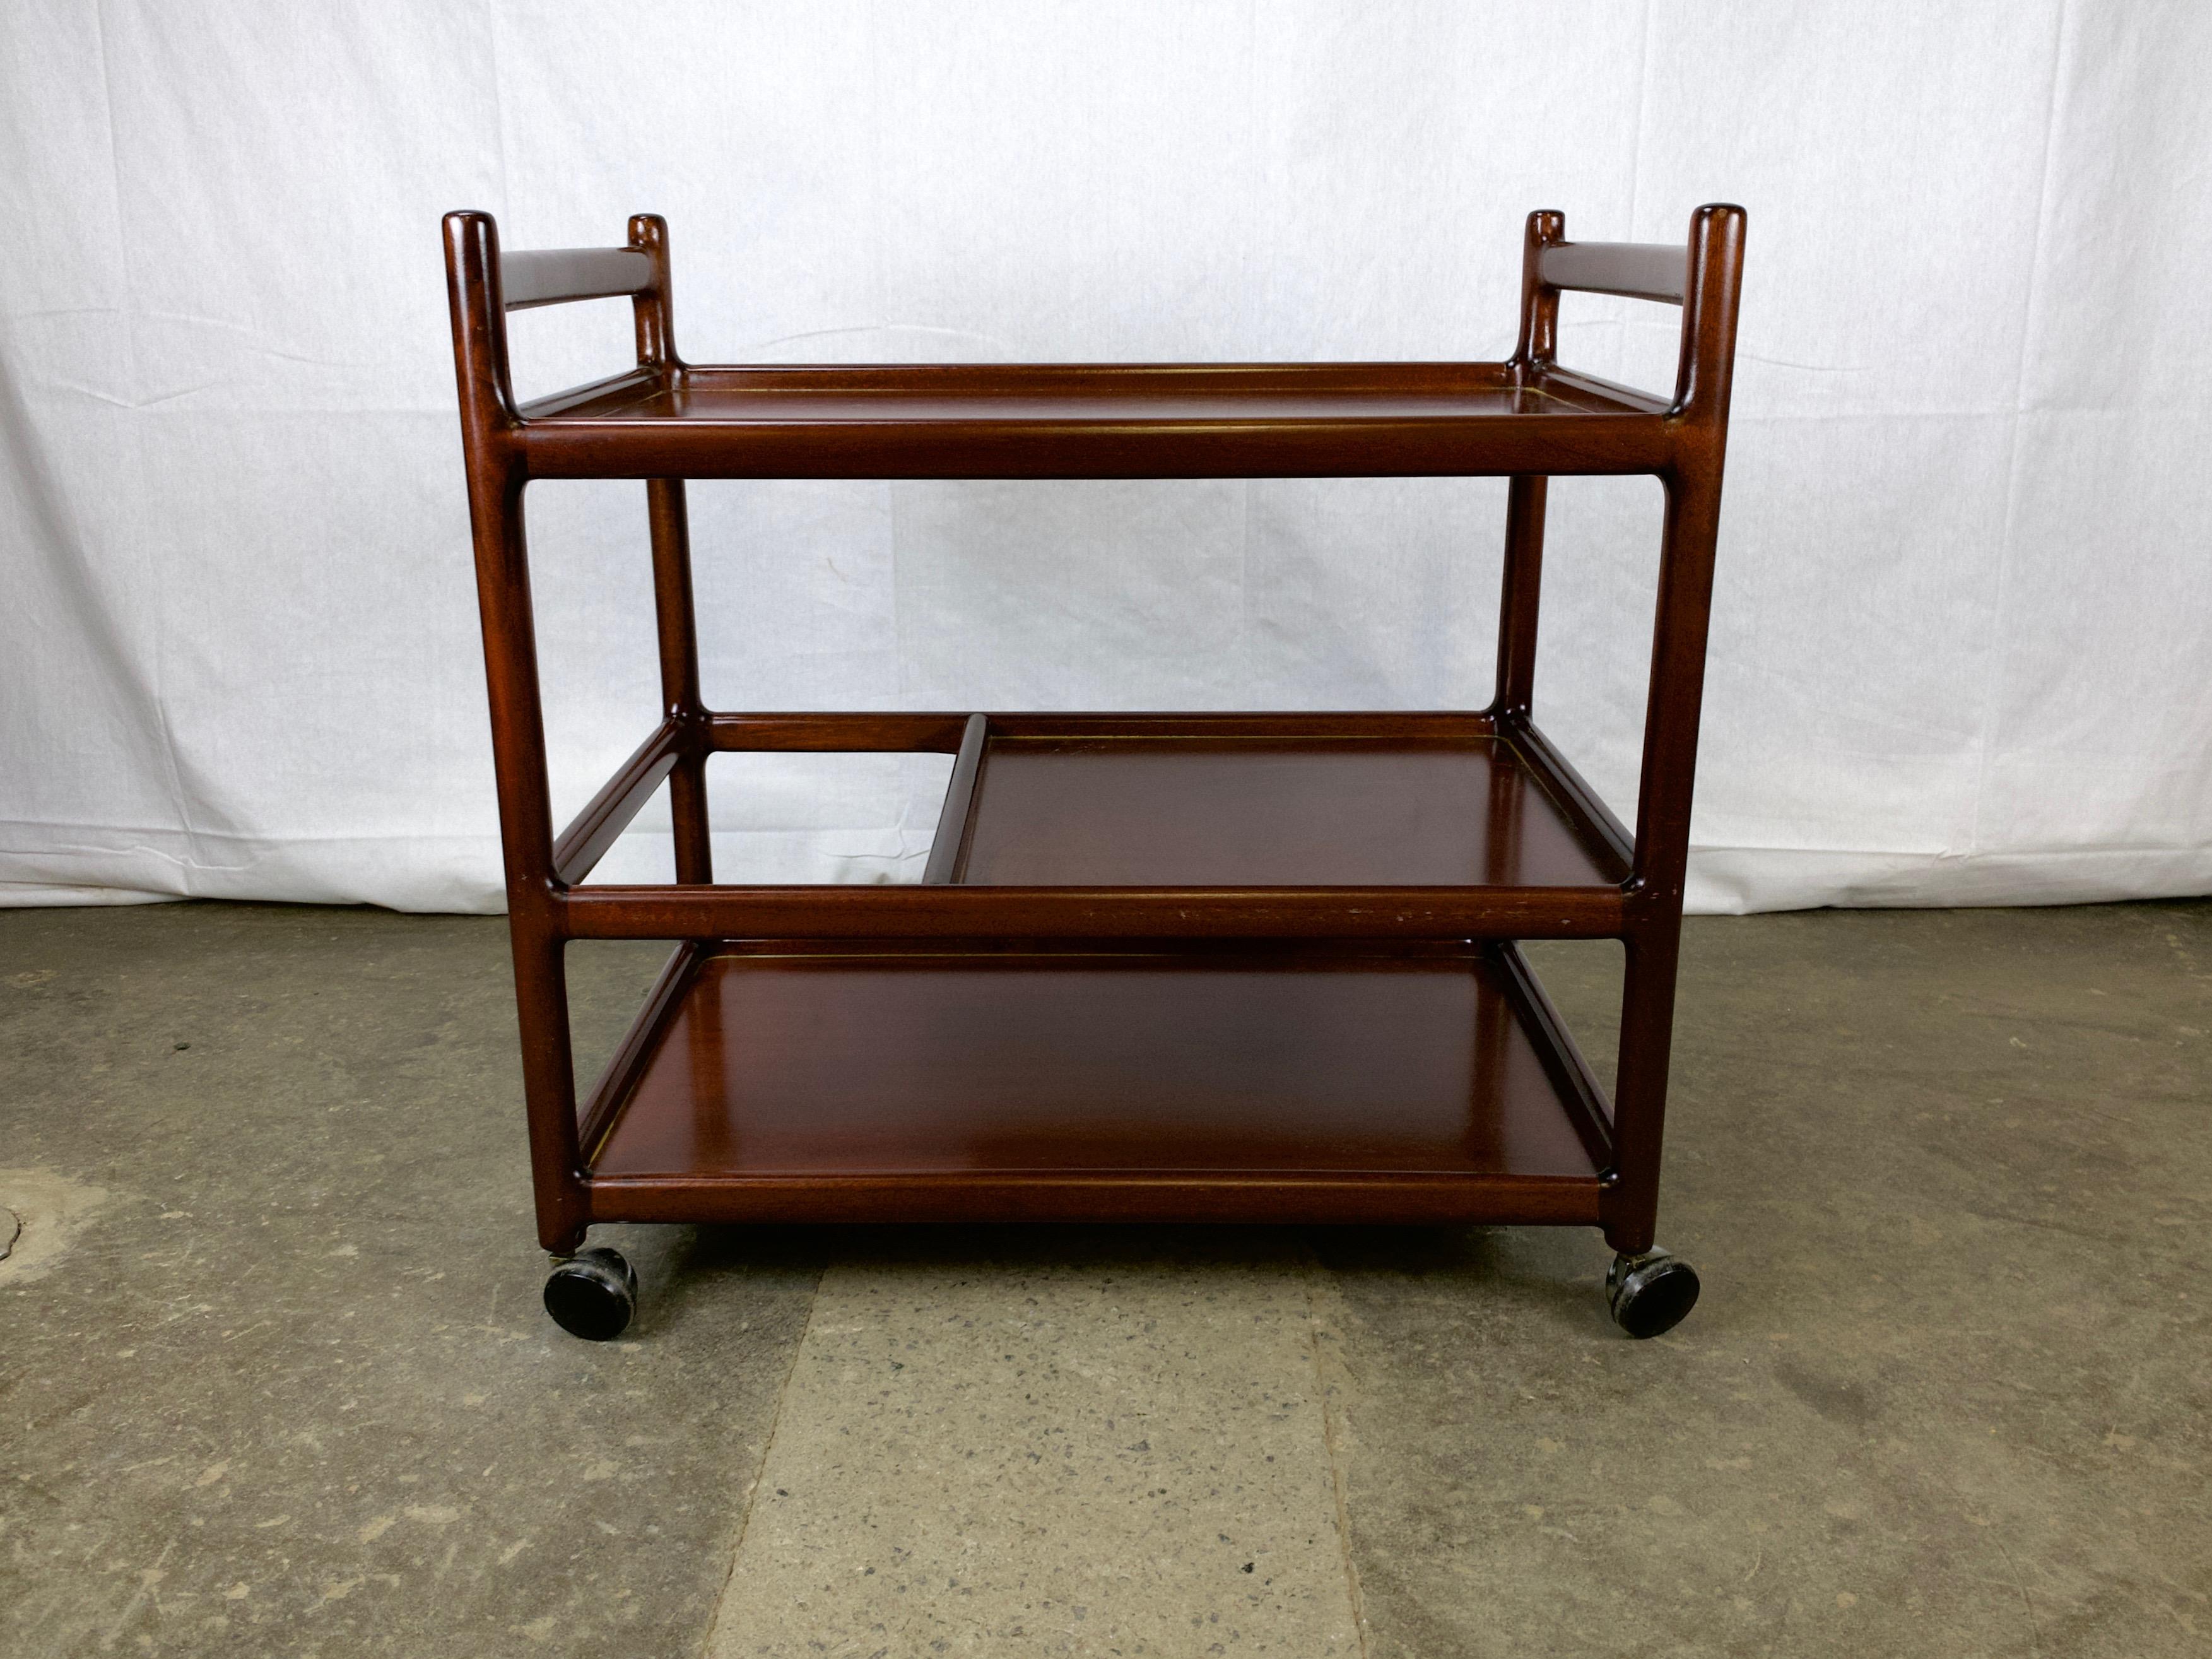 Tea trolley or bar cart designed by Johannes Andersen and made in Denmark by CFC Silkeborg. The frame is solid mahogany in a deep rosewood stain.

The cart features the graceful curves that are typical of Andersen's work, as the horizontal rungs